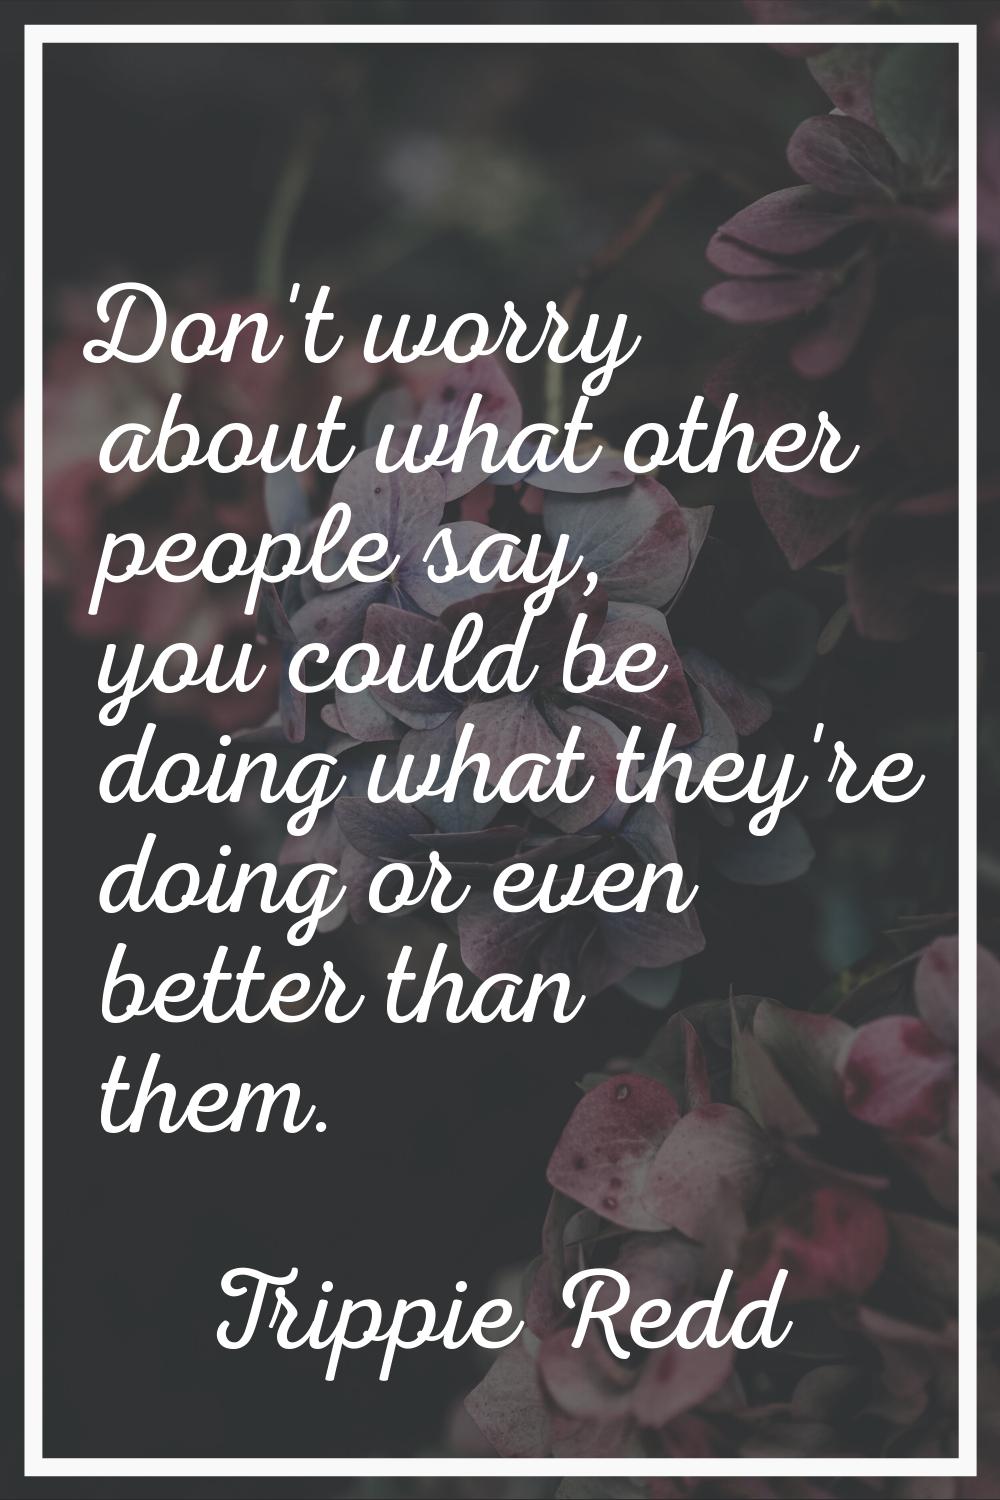 Don't worry about what other people say, you could be doing what they're doing or even better than 